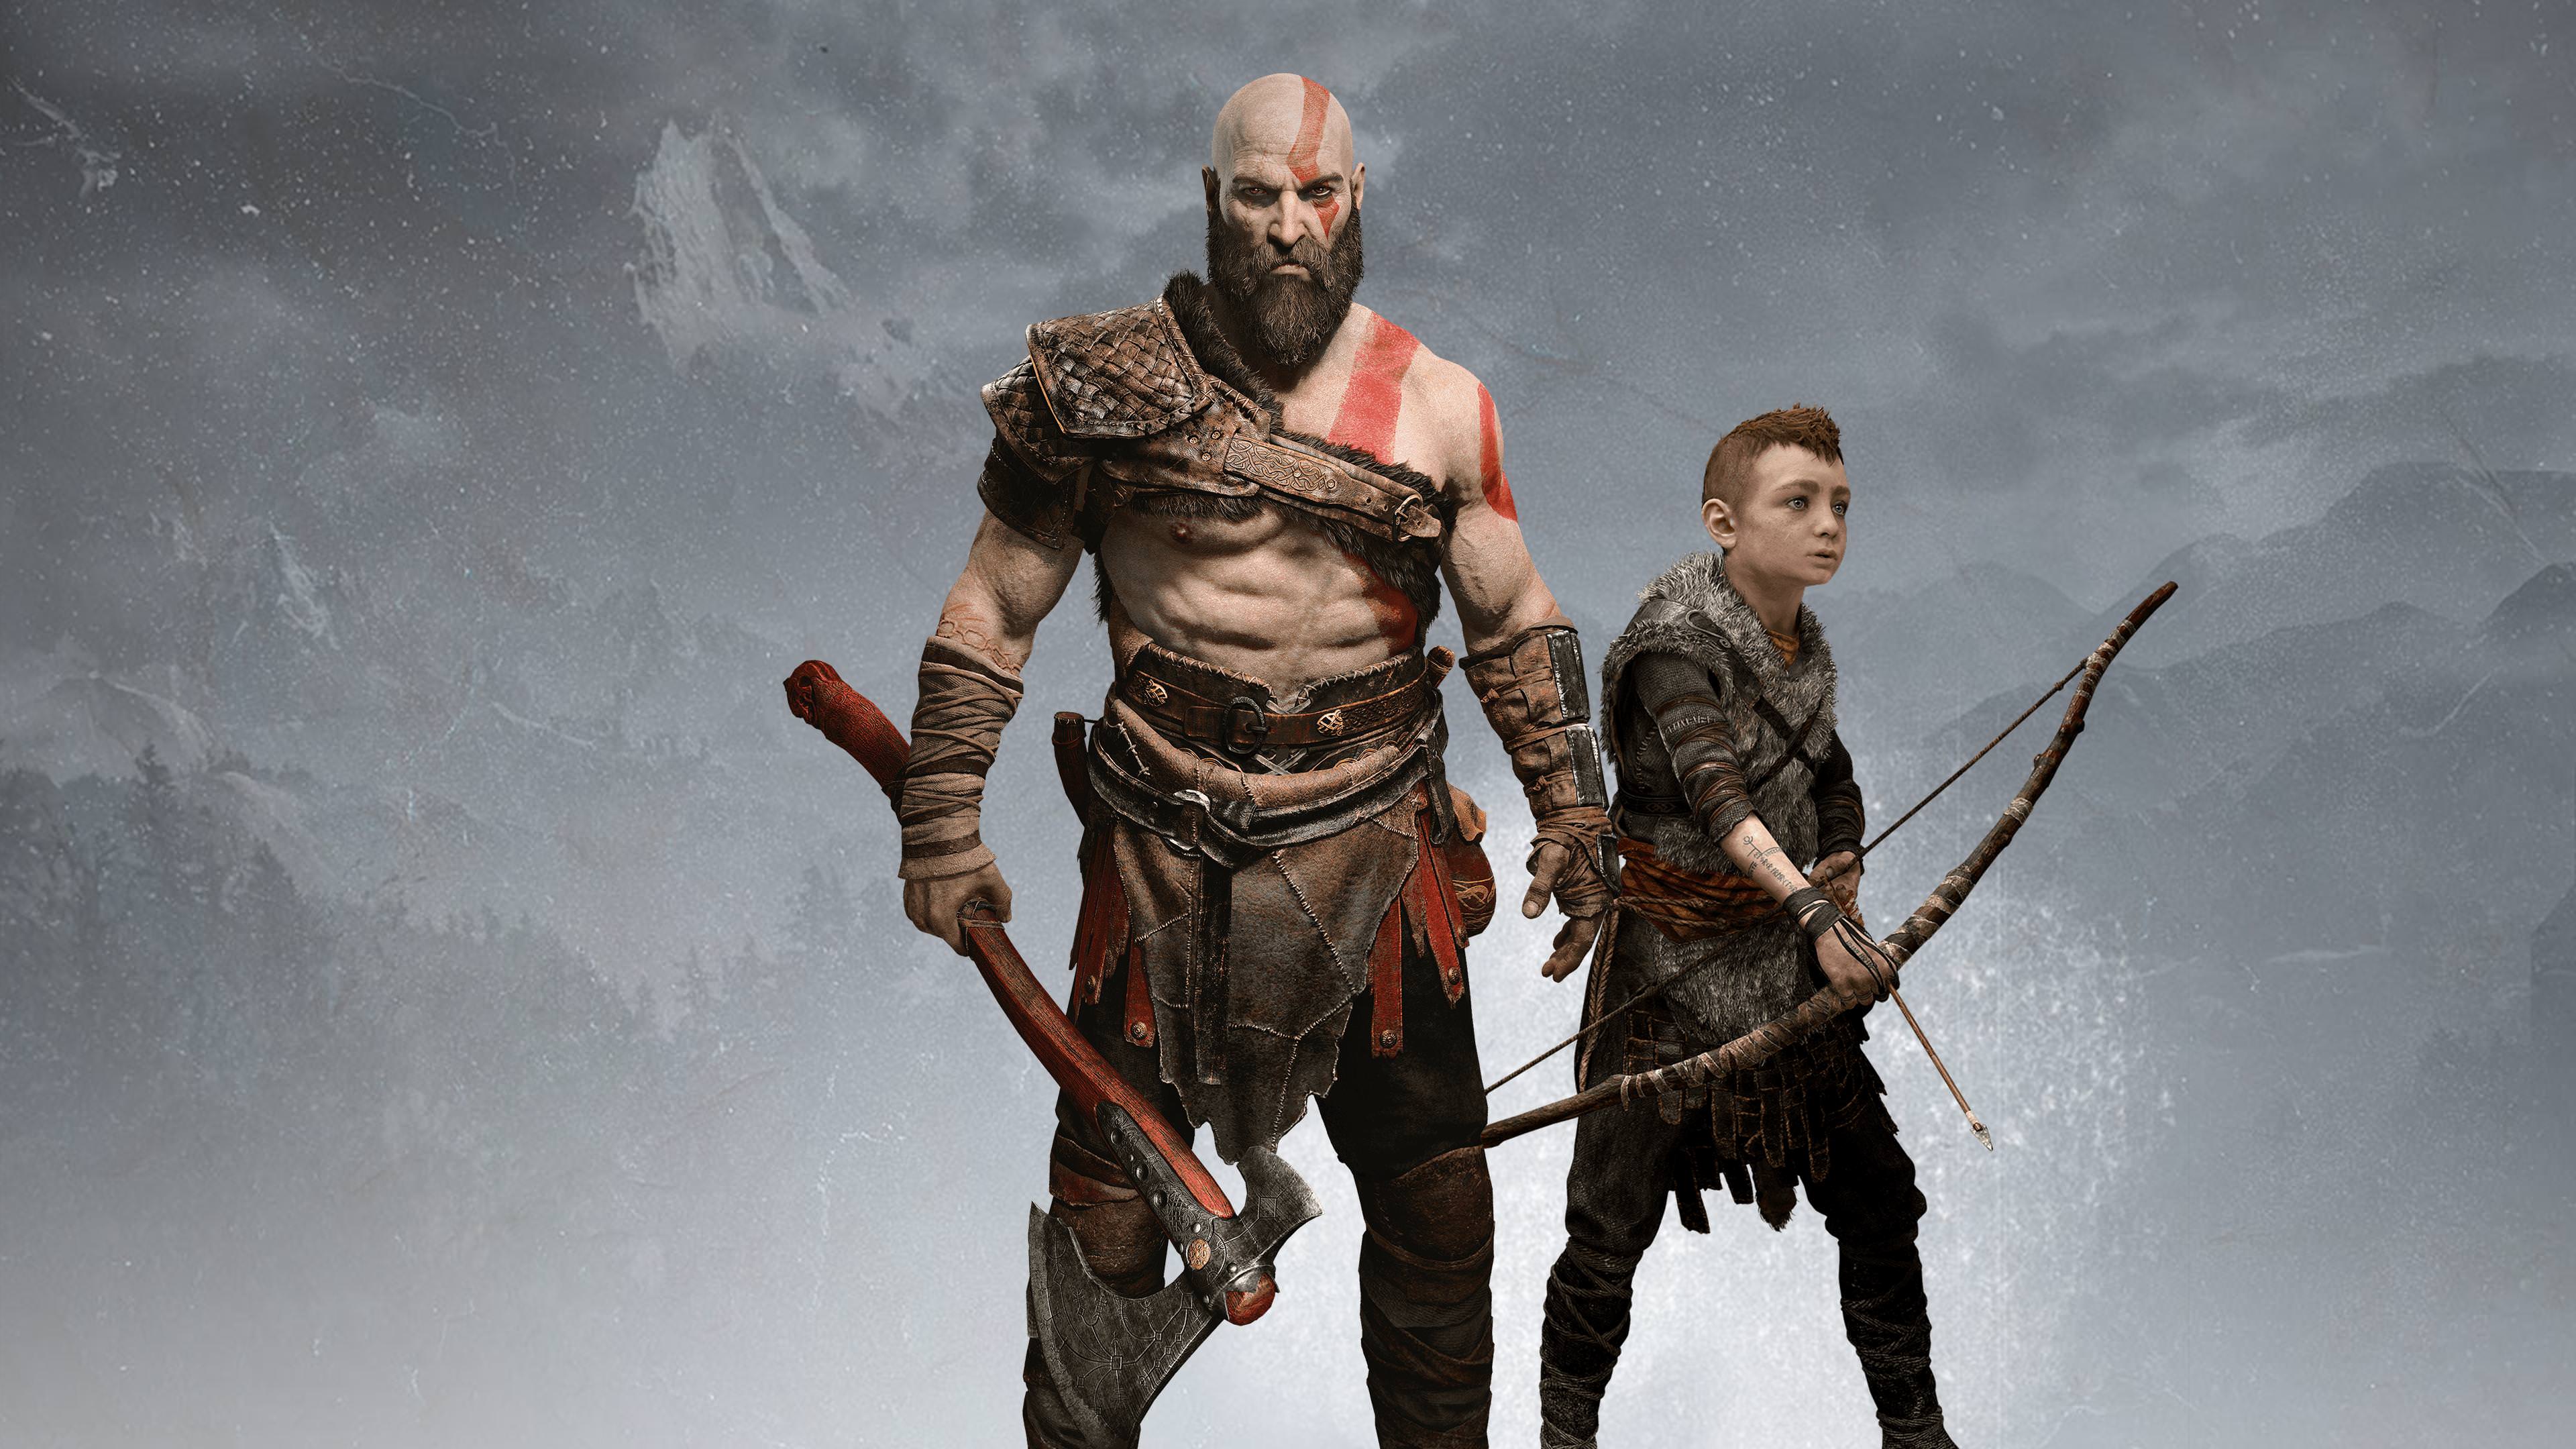 God of War Collector's Edition PlayStation 4 2018 4K Wallpapers